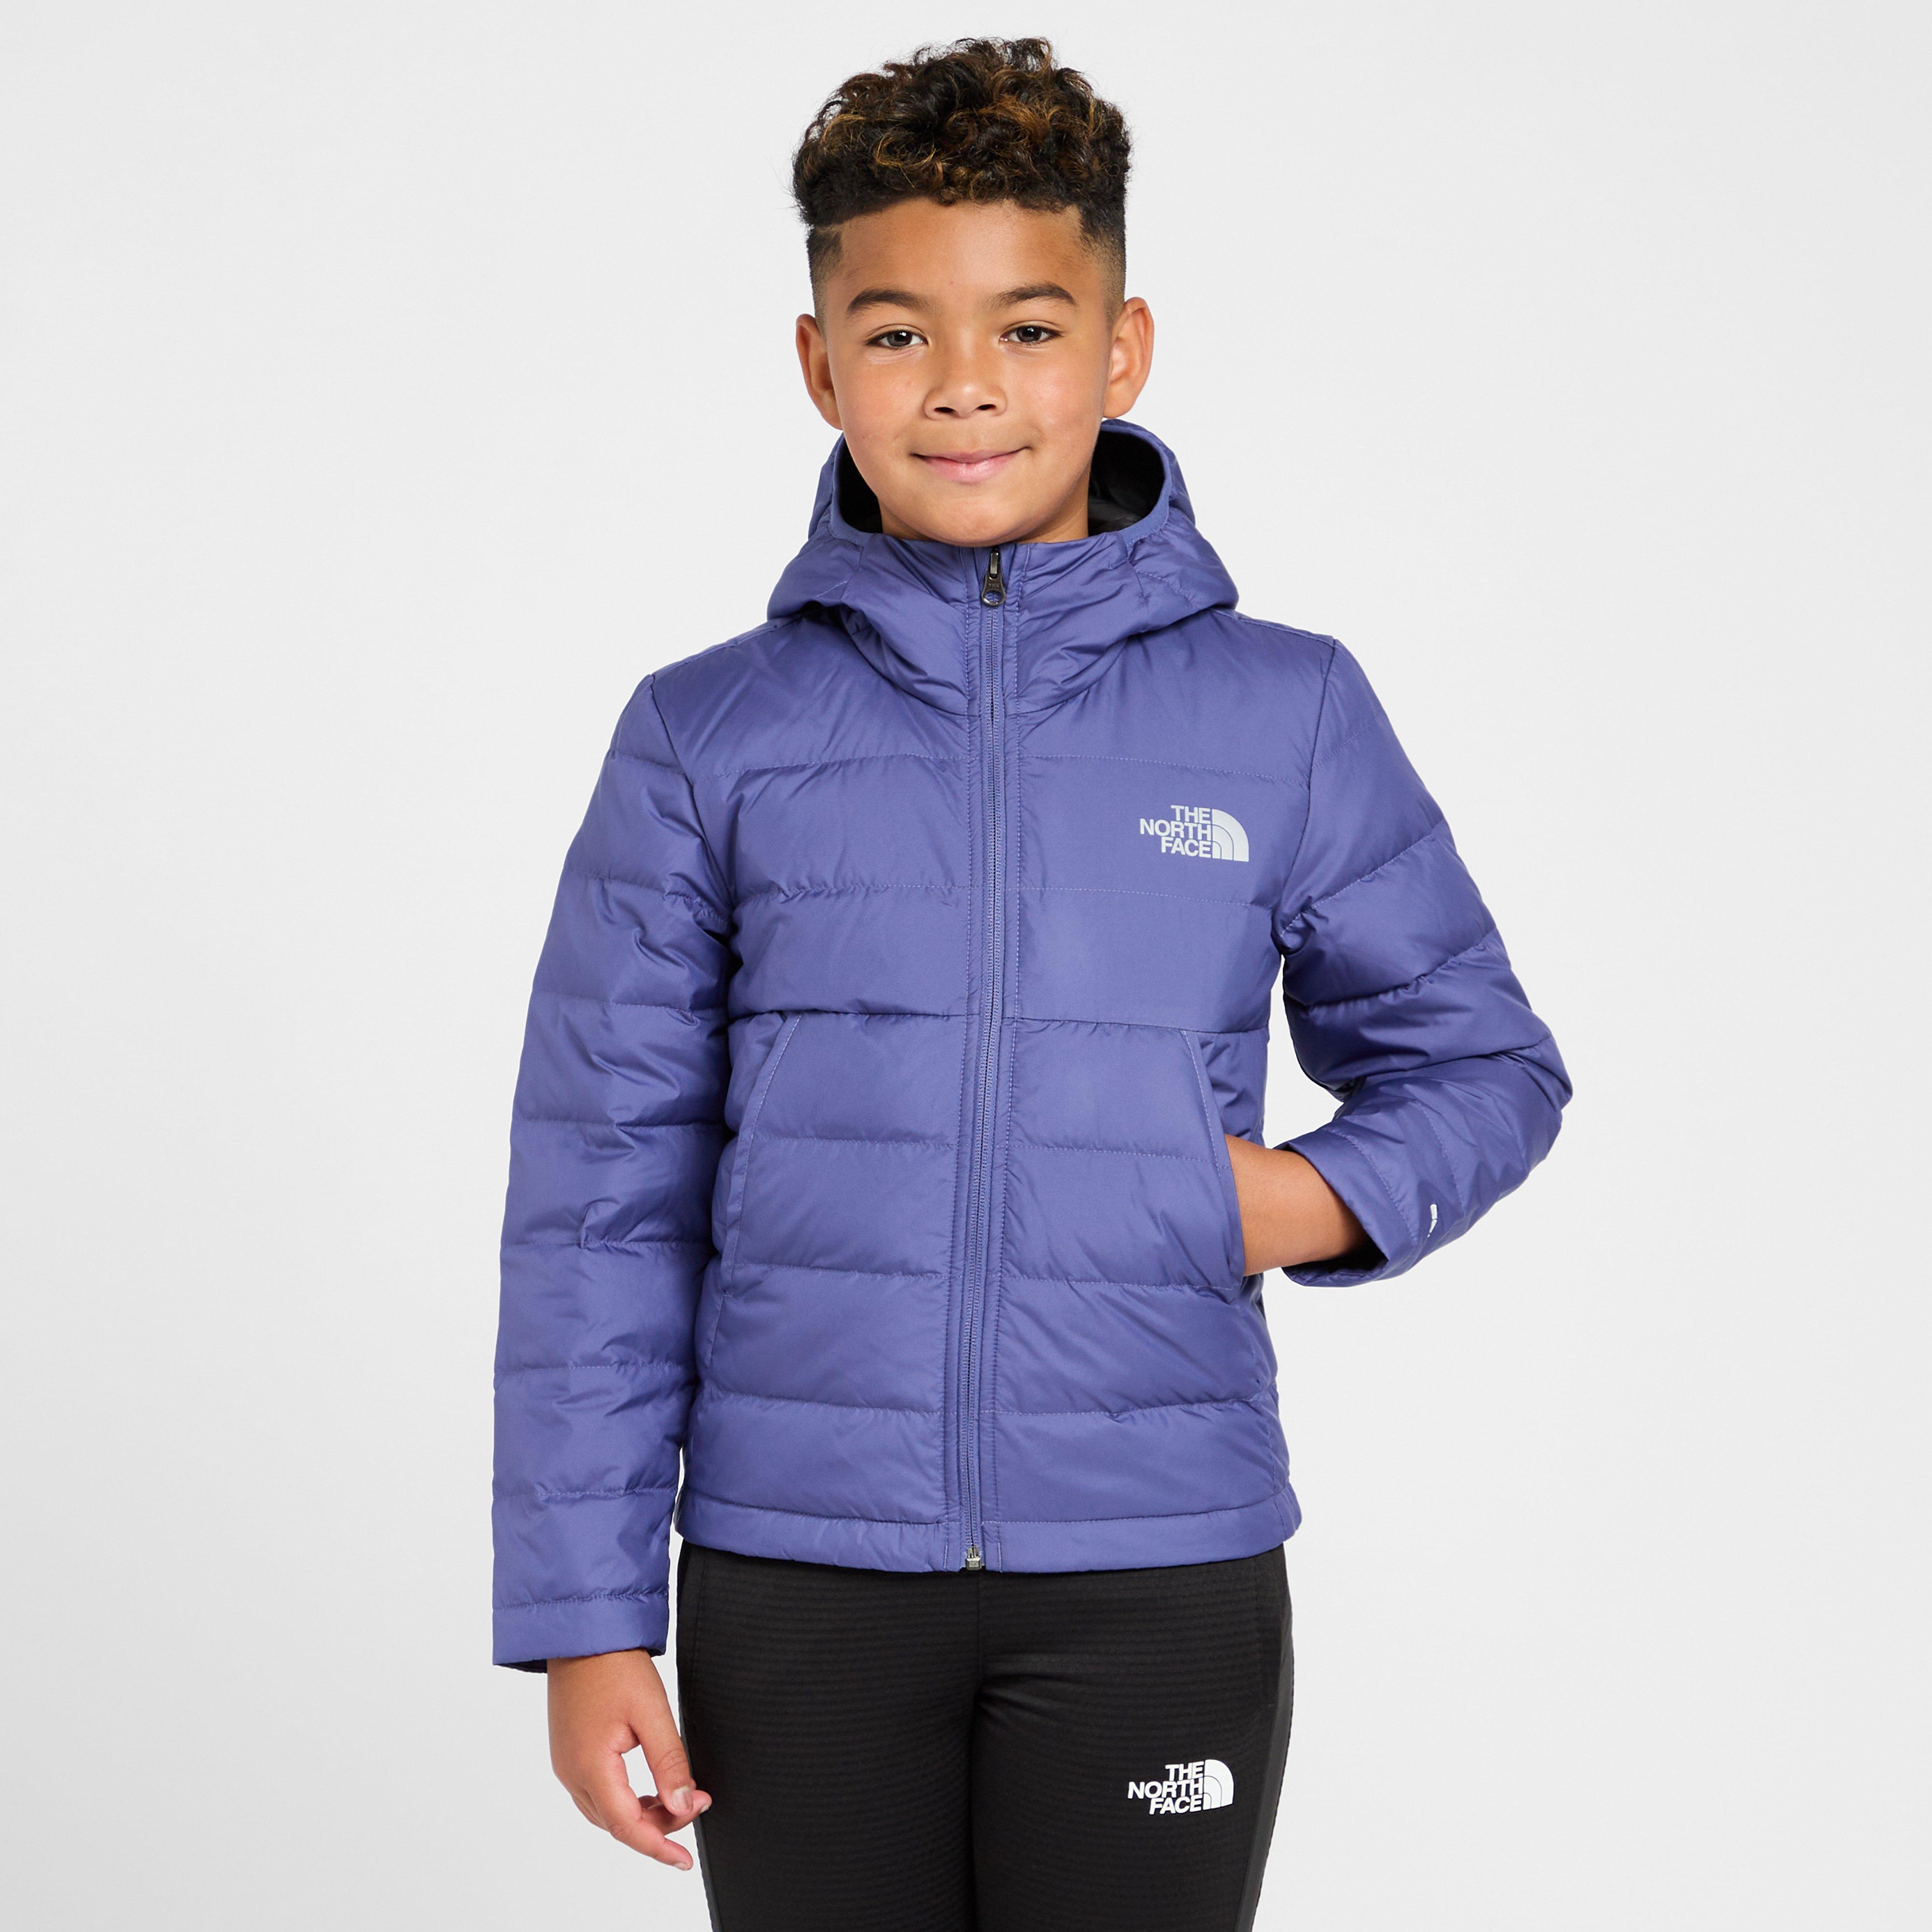 The North Face The North Face Kids